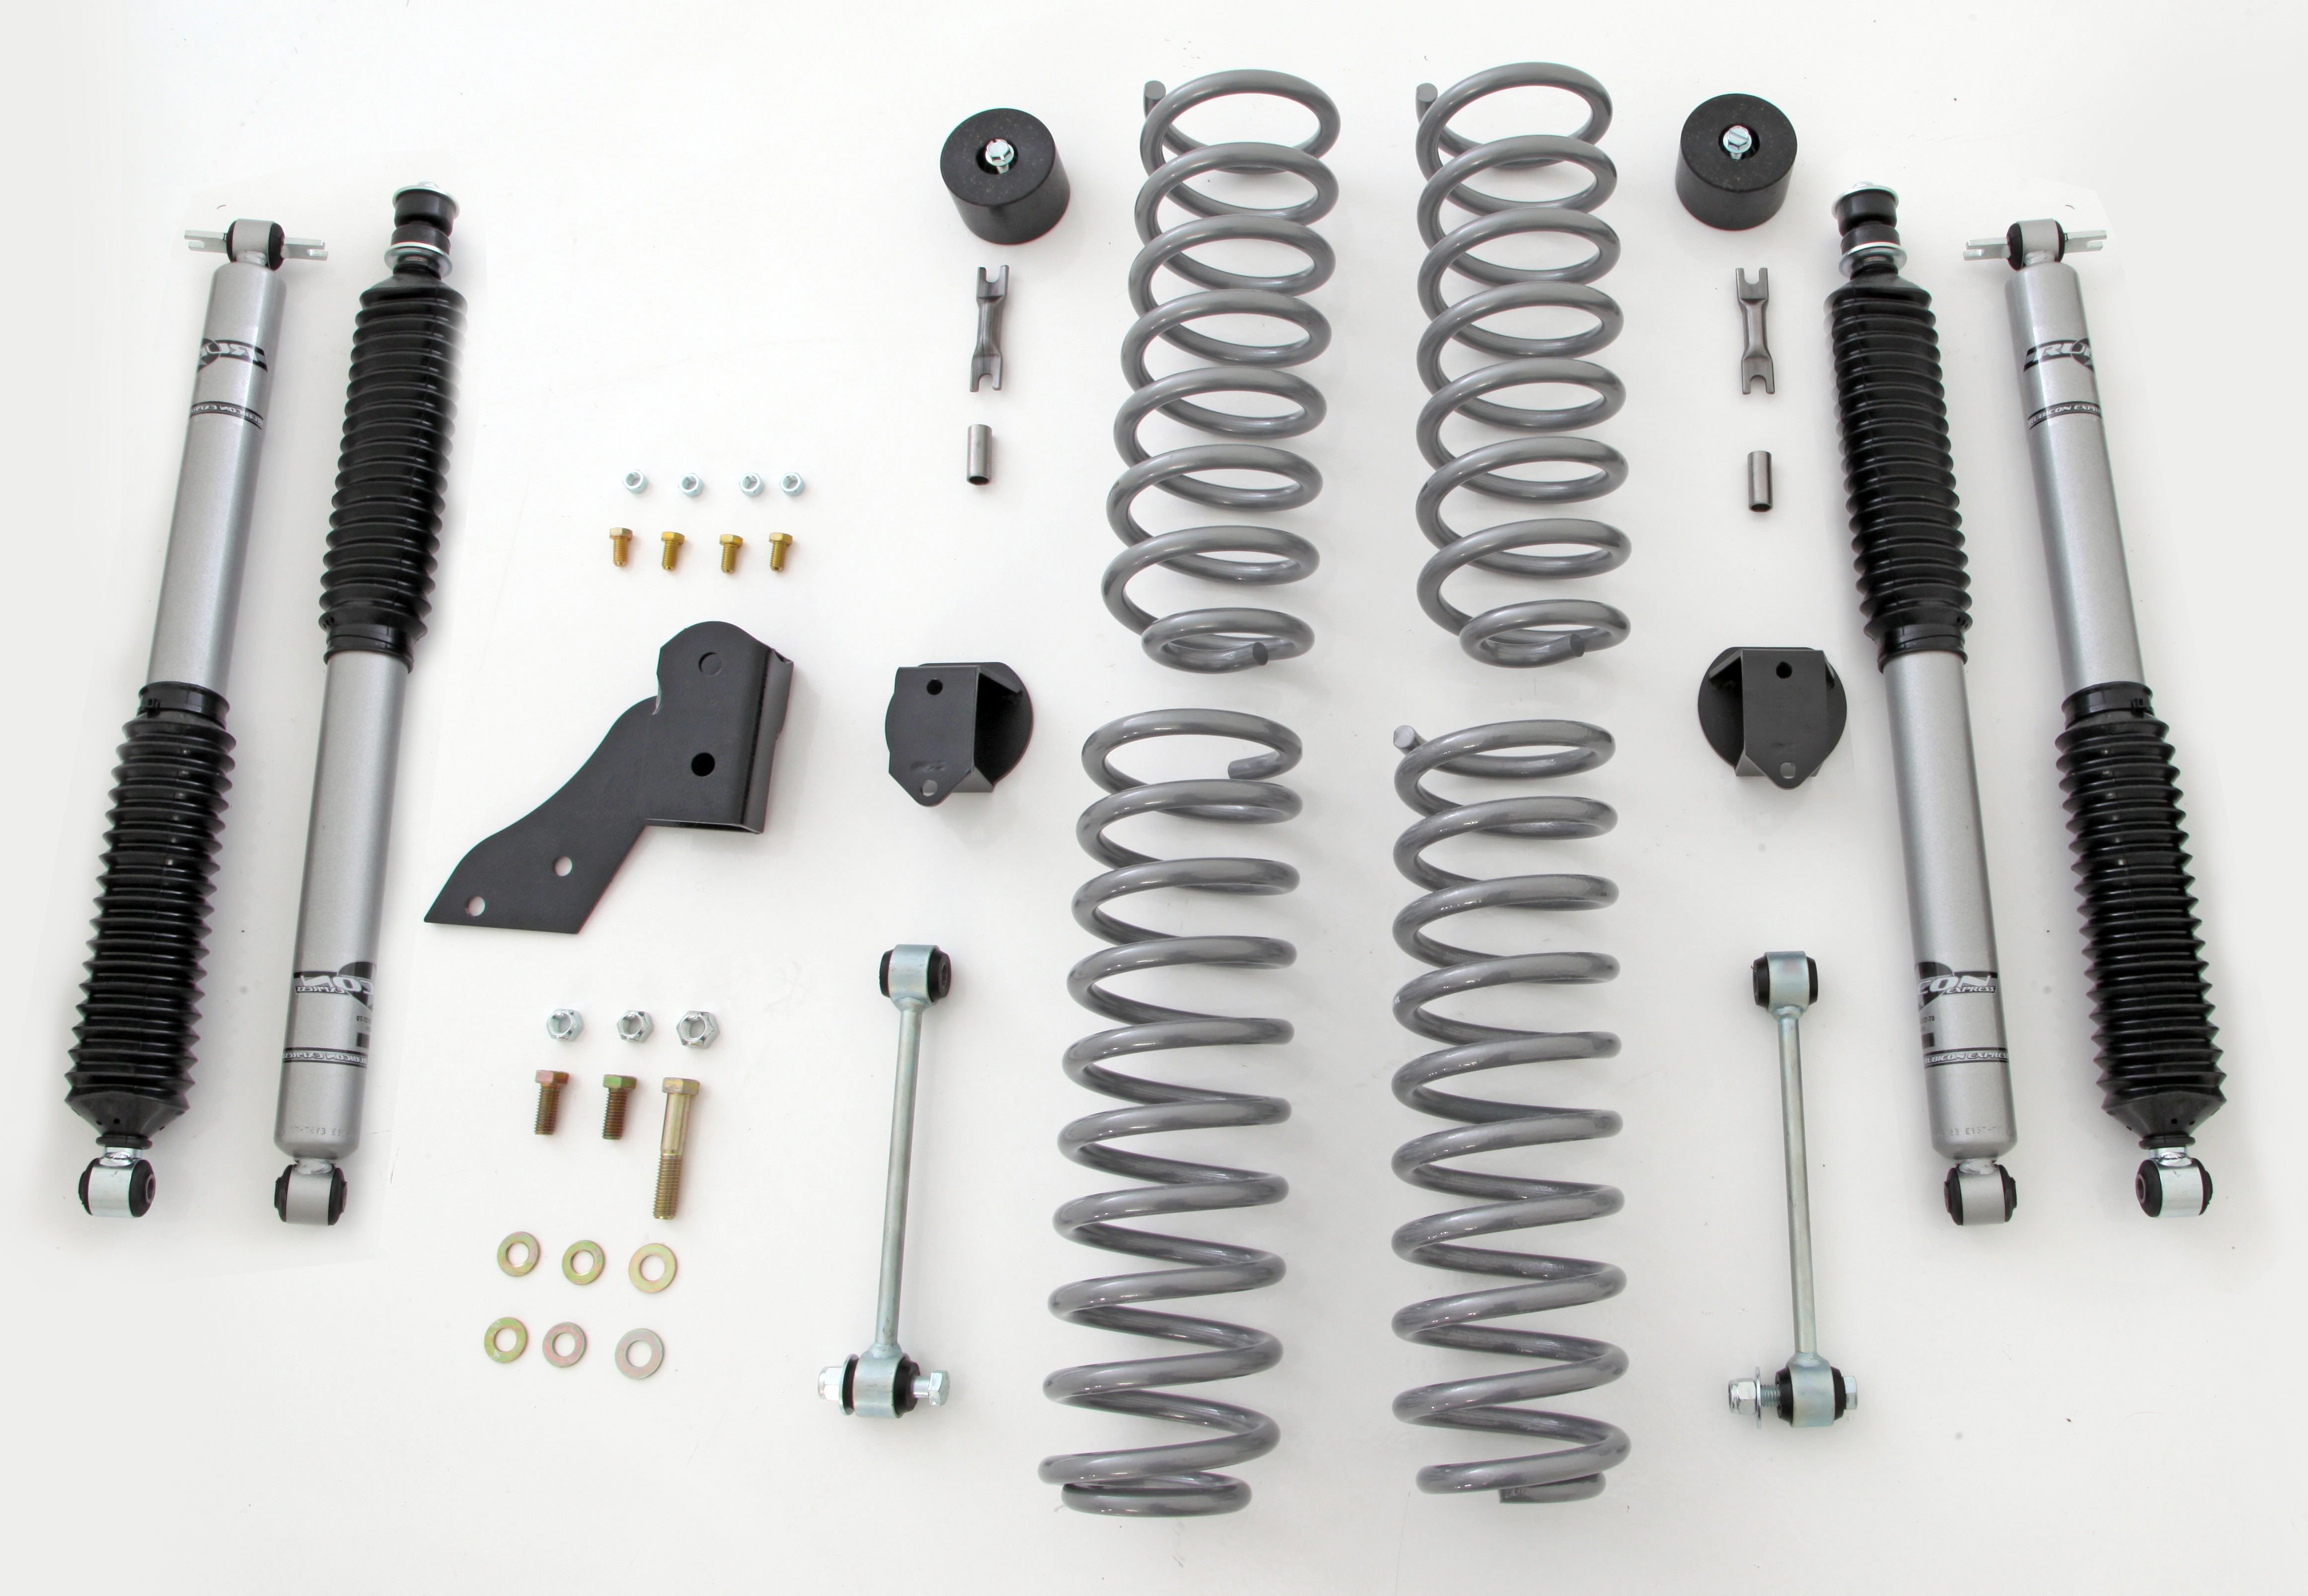 New Rubicon Express 2.5” Suspension Systems For ‘07-‘12 Jeep Wrangler